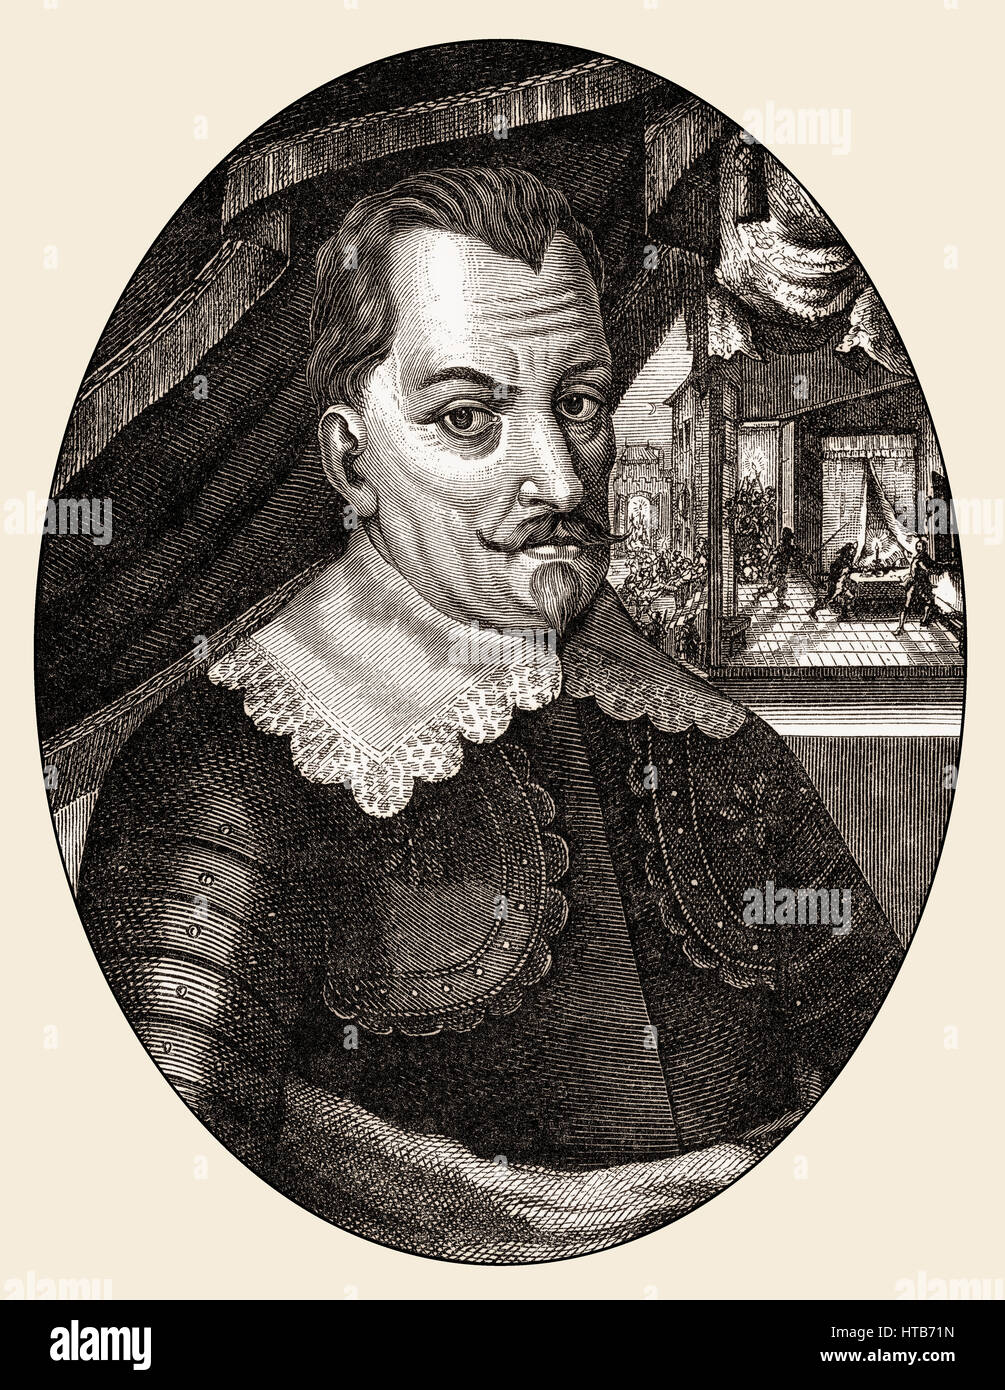 Wallenstein or Albrecht Wenzel Eusebius von Waldstein, 1583 - 1634, Duke of Friedland and Sagan, commander of the imperial forces in the Thirty Years' Stock Photo